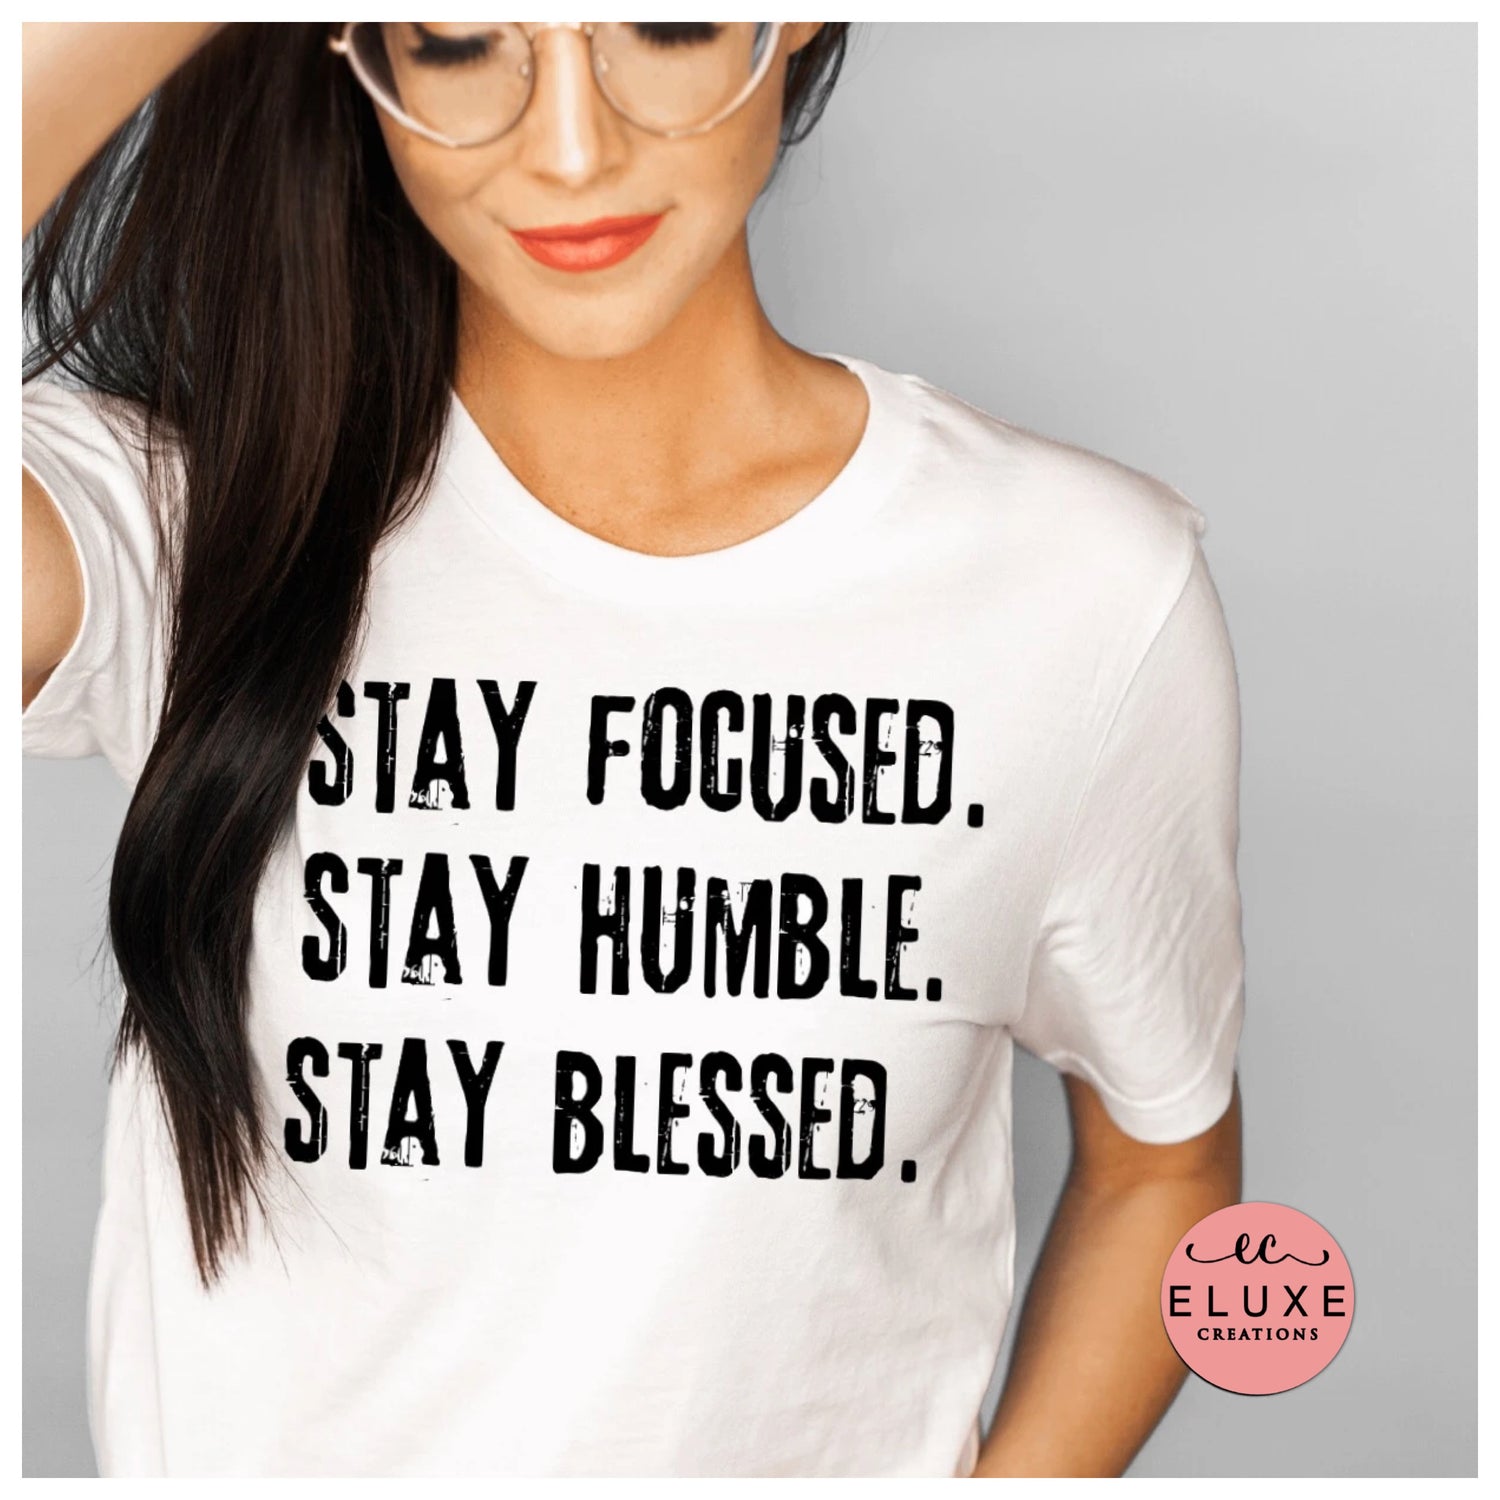 Stay Focused, Stay Humble, Stay Blessed T-Shirt - Eluxe Creations